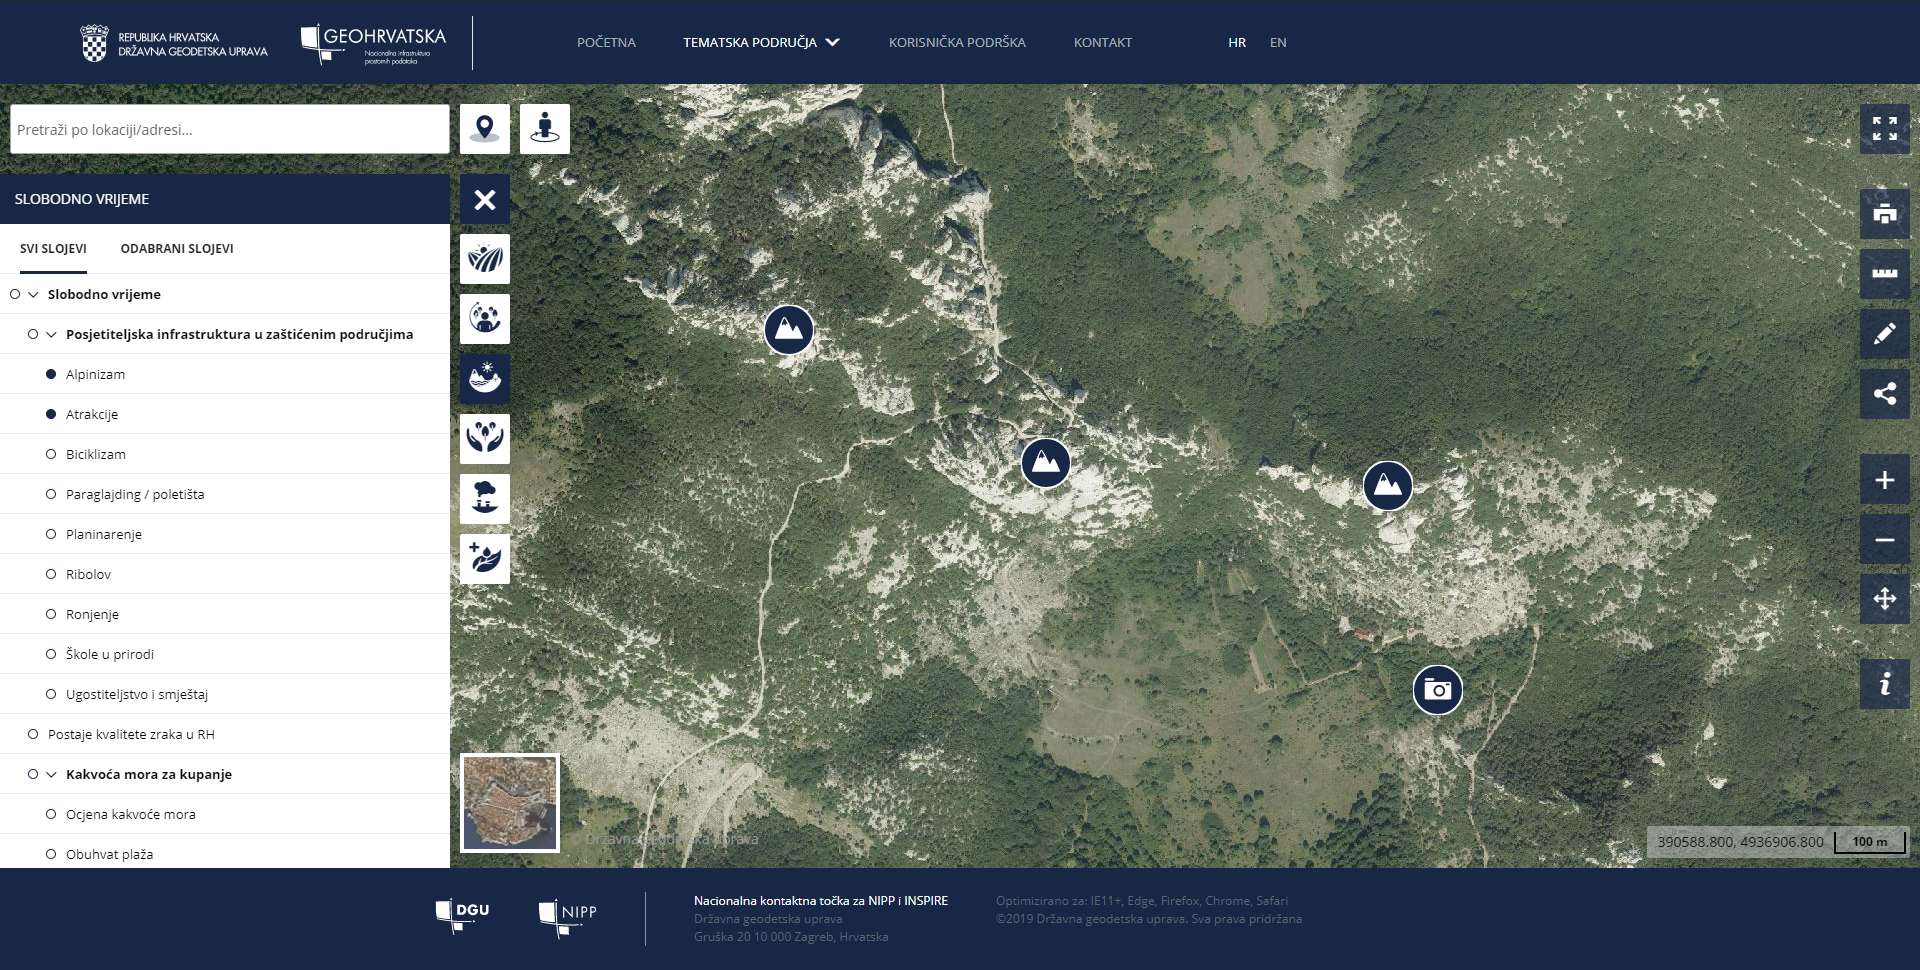 Display of the browser GeoHrvatska. The left side of the image shows a menu of layers from six thematic categories. On the right side of the image, the icons with the corresponding symbols indicate the closest spatial data from the selected layer.